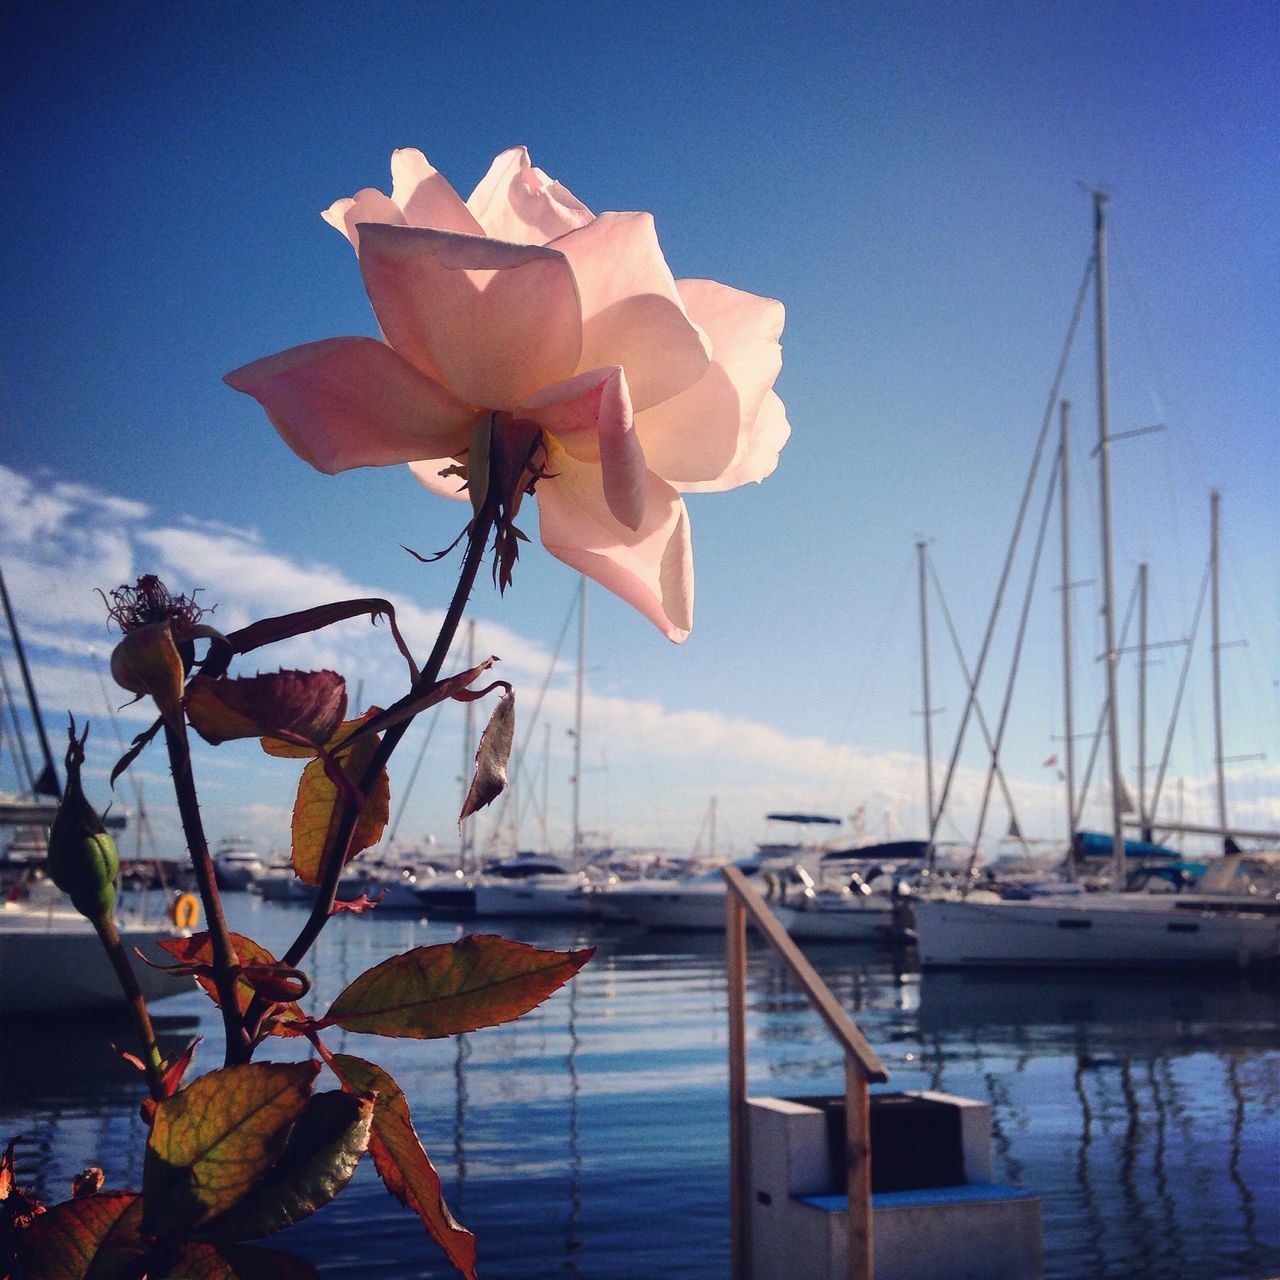 water, sky, nautical vessel, moored, boat, nature, beauty in nature, transportation, sea, flower, plant, lake, reflection, tranquility, blue, no people, leaf, outdoors, stem, mode of transport